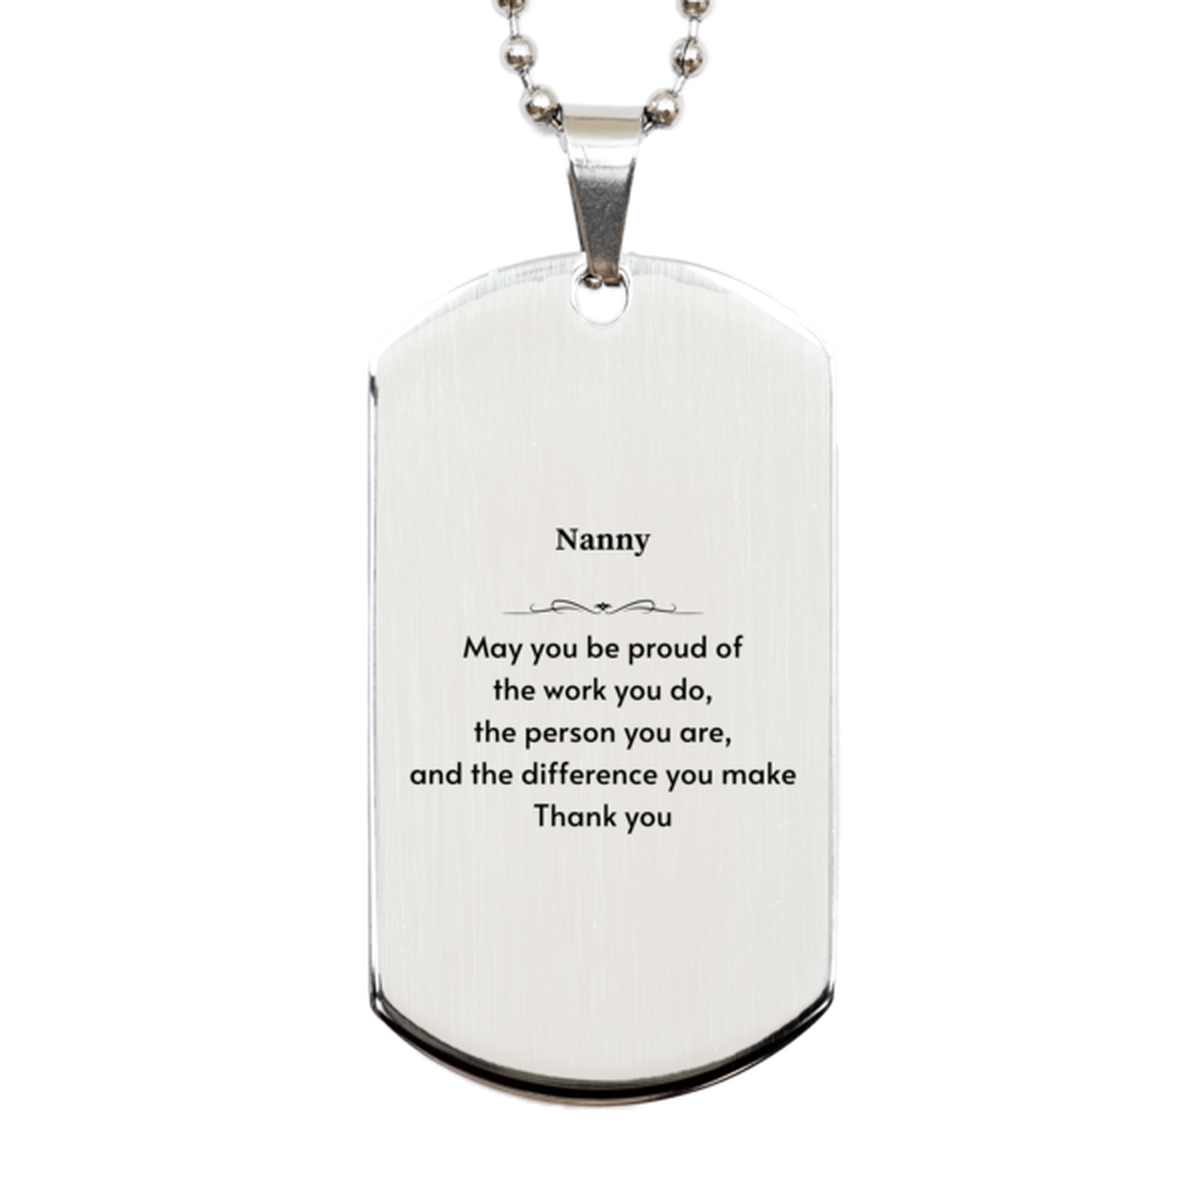 Heartwarming Silver Dog Tag Retirement Coworkers Gifts for Nanny, Nanny May You be proud of the work you do, the person you are Gifts for Boss Men Women Friends